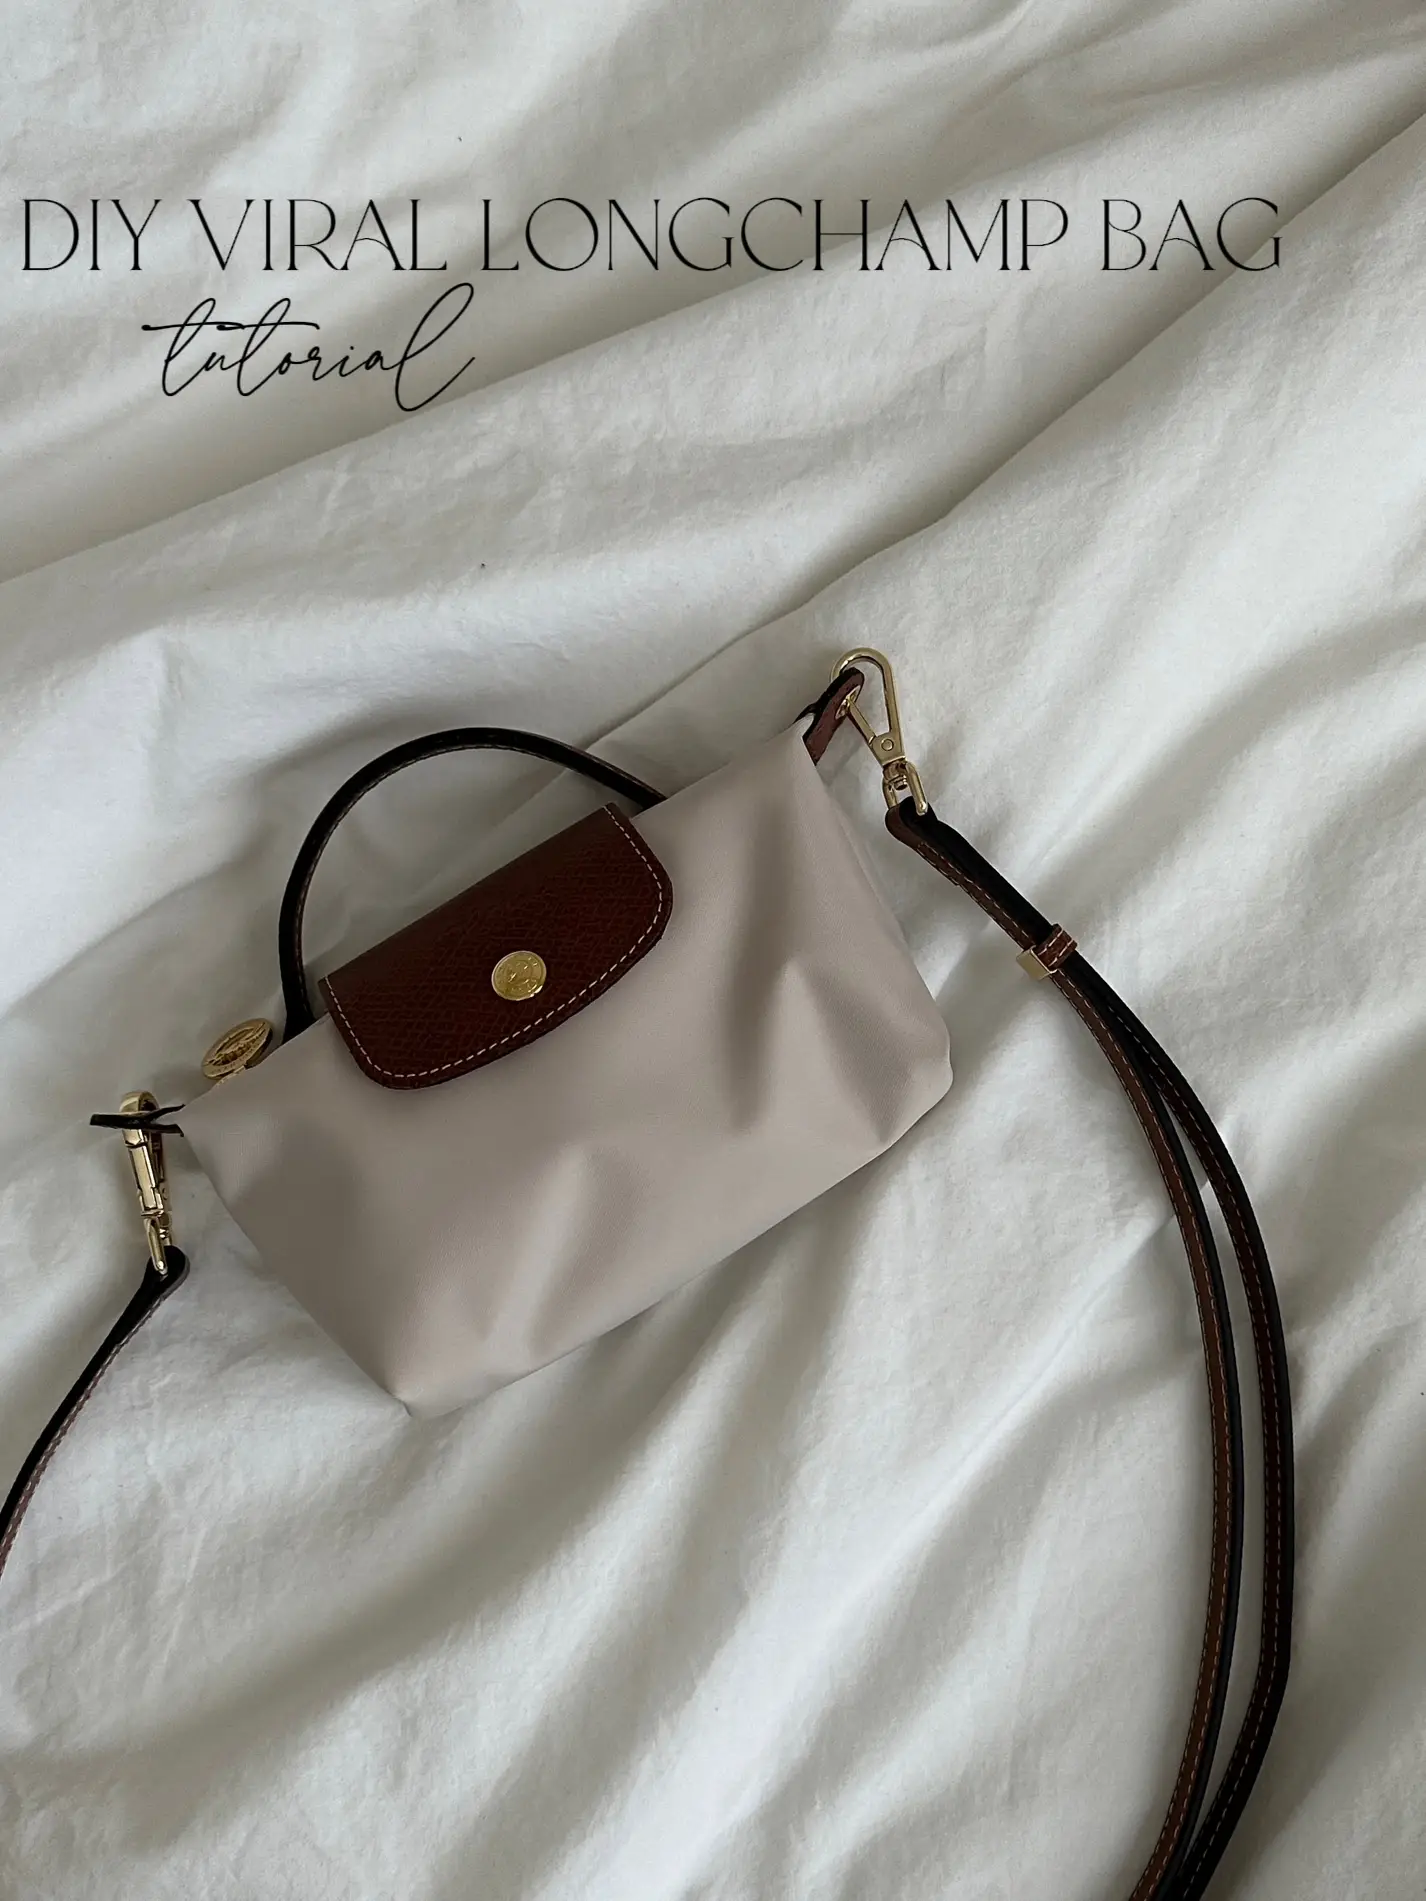 Put on the strings for Longchamp mini.✨, Gallery posted by earthpr_